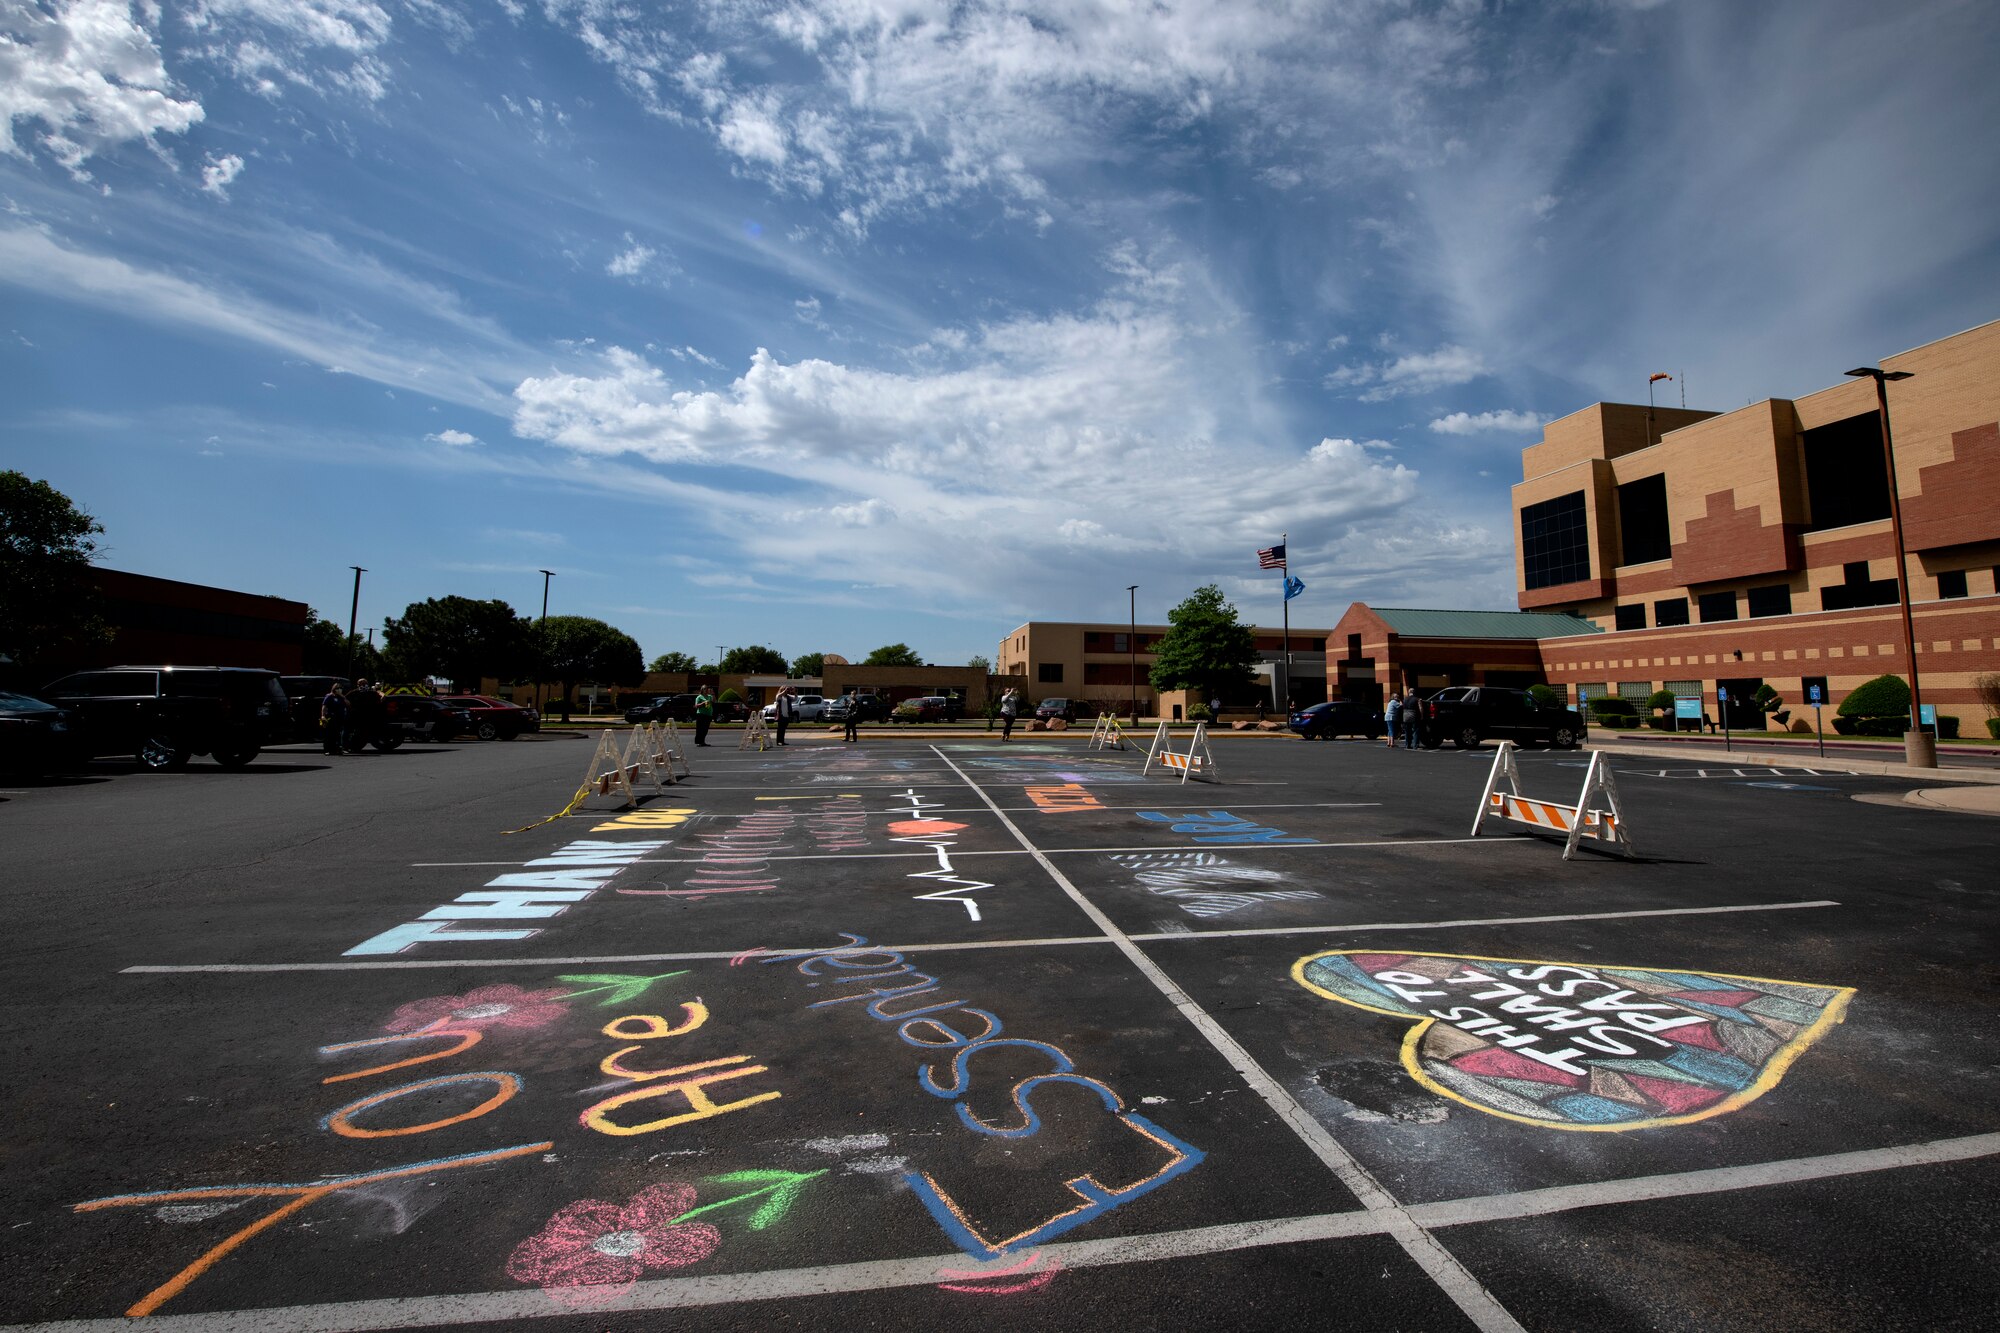 Messages of encouragement and support were drawn in the parking lot at Jackson County Memorial Hospital in Altus, Oklahoma, May 1, 2020.